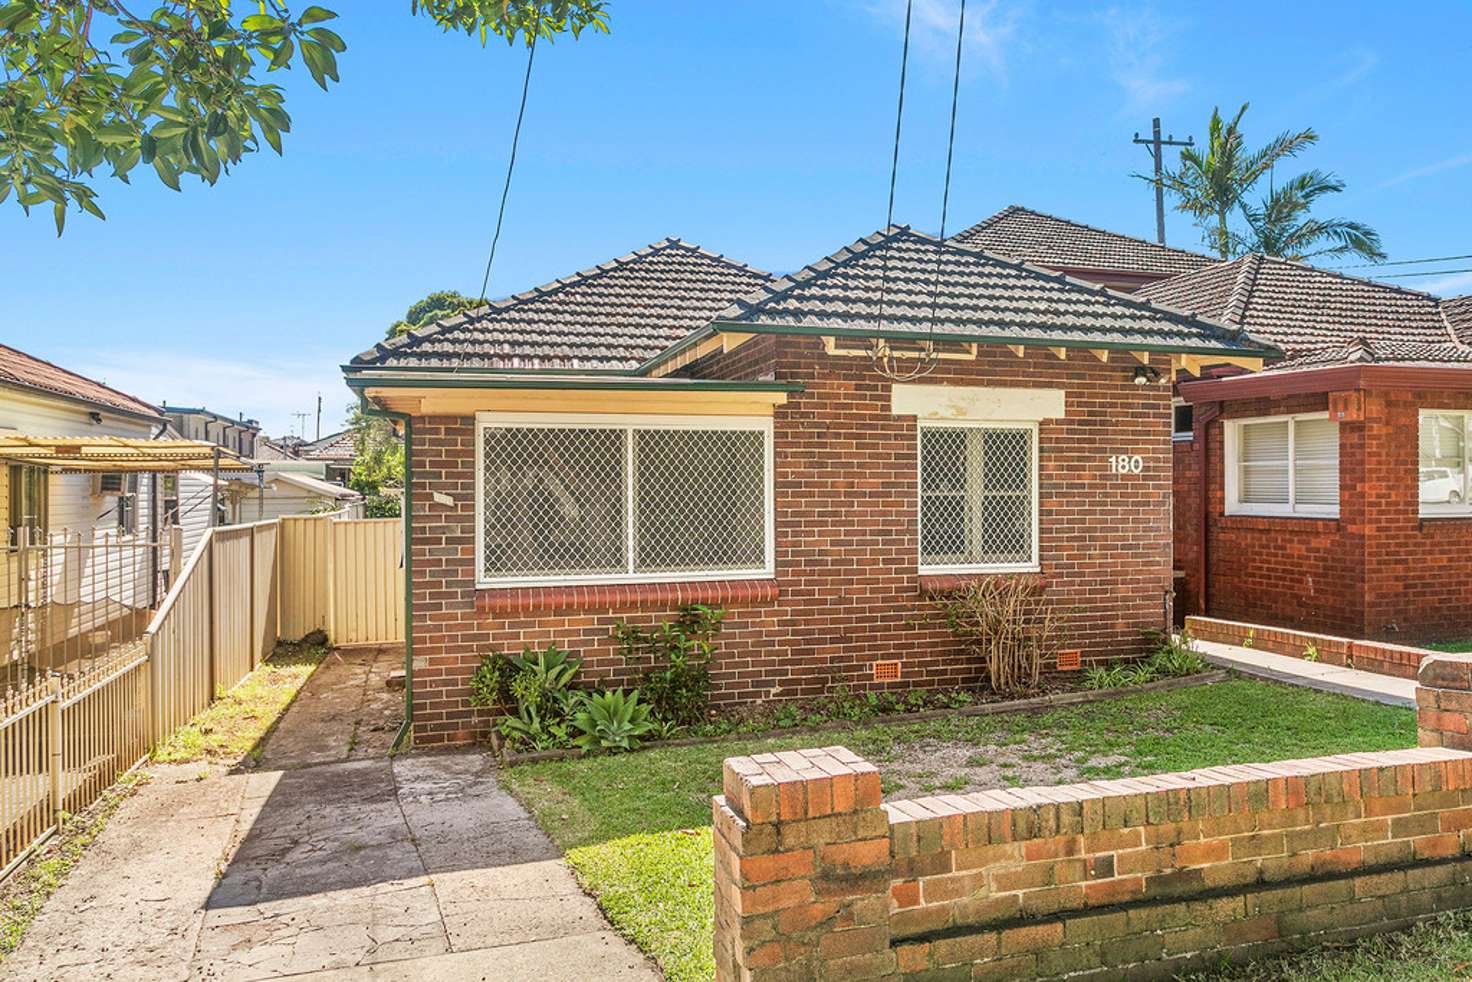 Main view of Homely house listing, 180 Patrick St, Hurstville NSW 2220